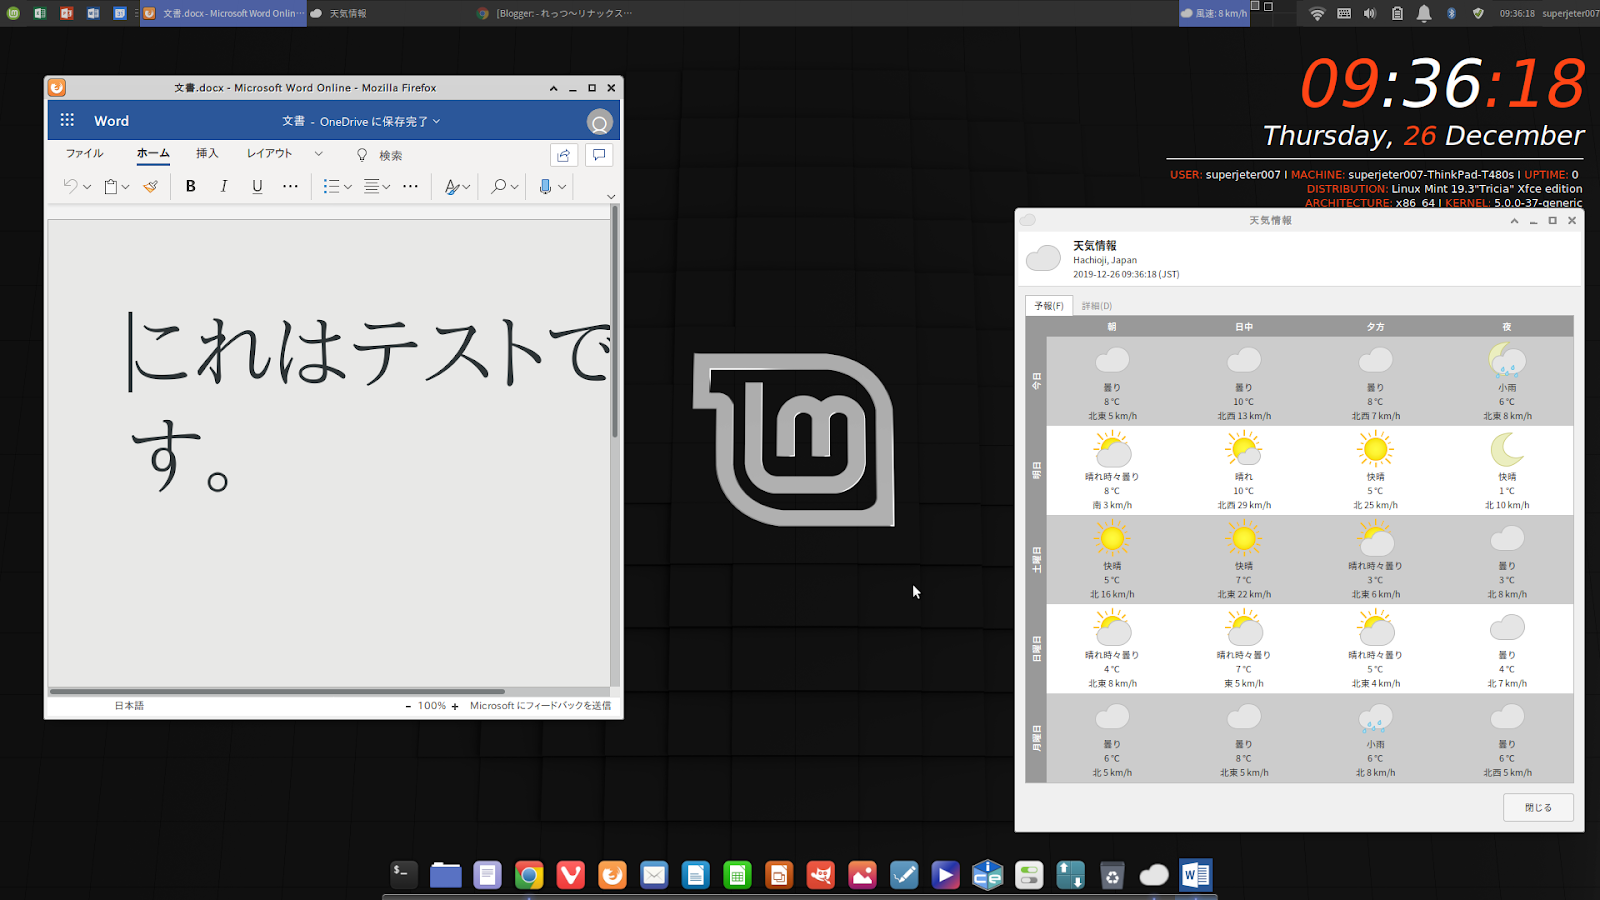 Linux Mint 19 3 Tricia Xfce Edition Linux Mint 19 3 Tricia Xfce Editionを徹底カスタマイズ Firefox 最新ice Ssb Managerによるms Office Online定義とその結果は如何